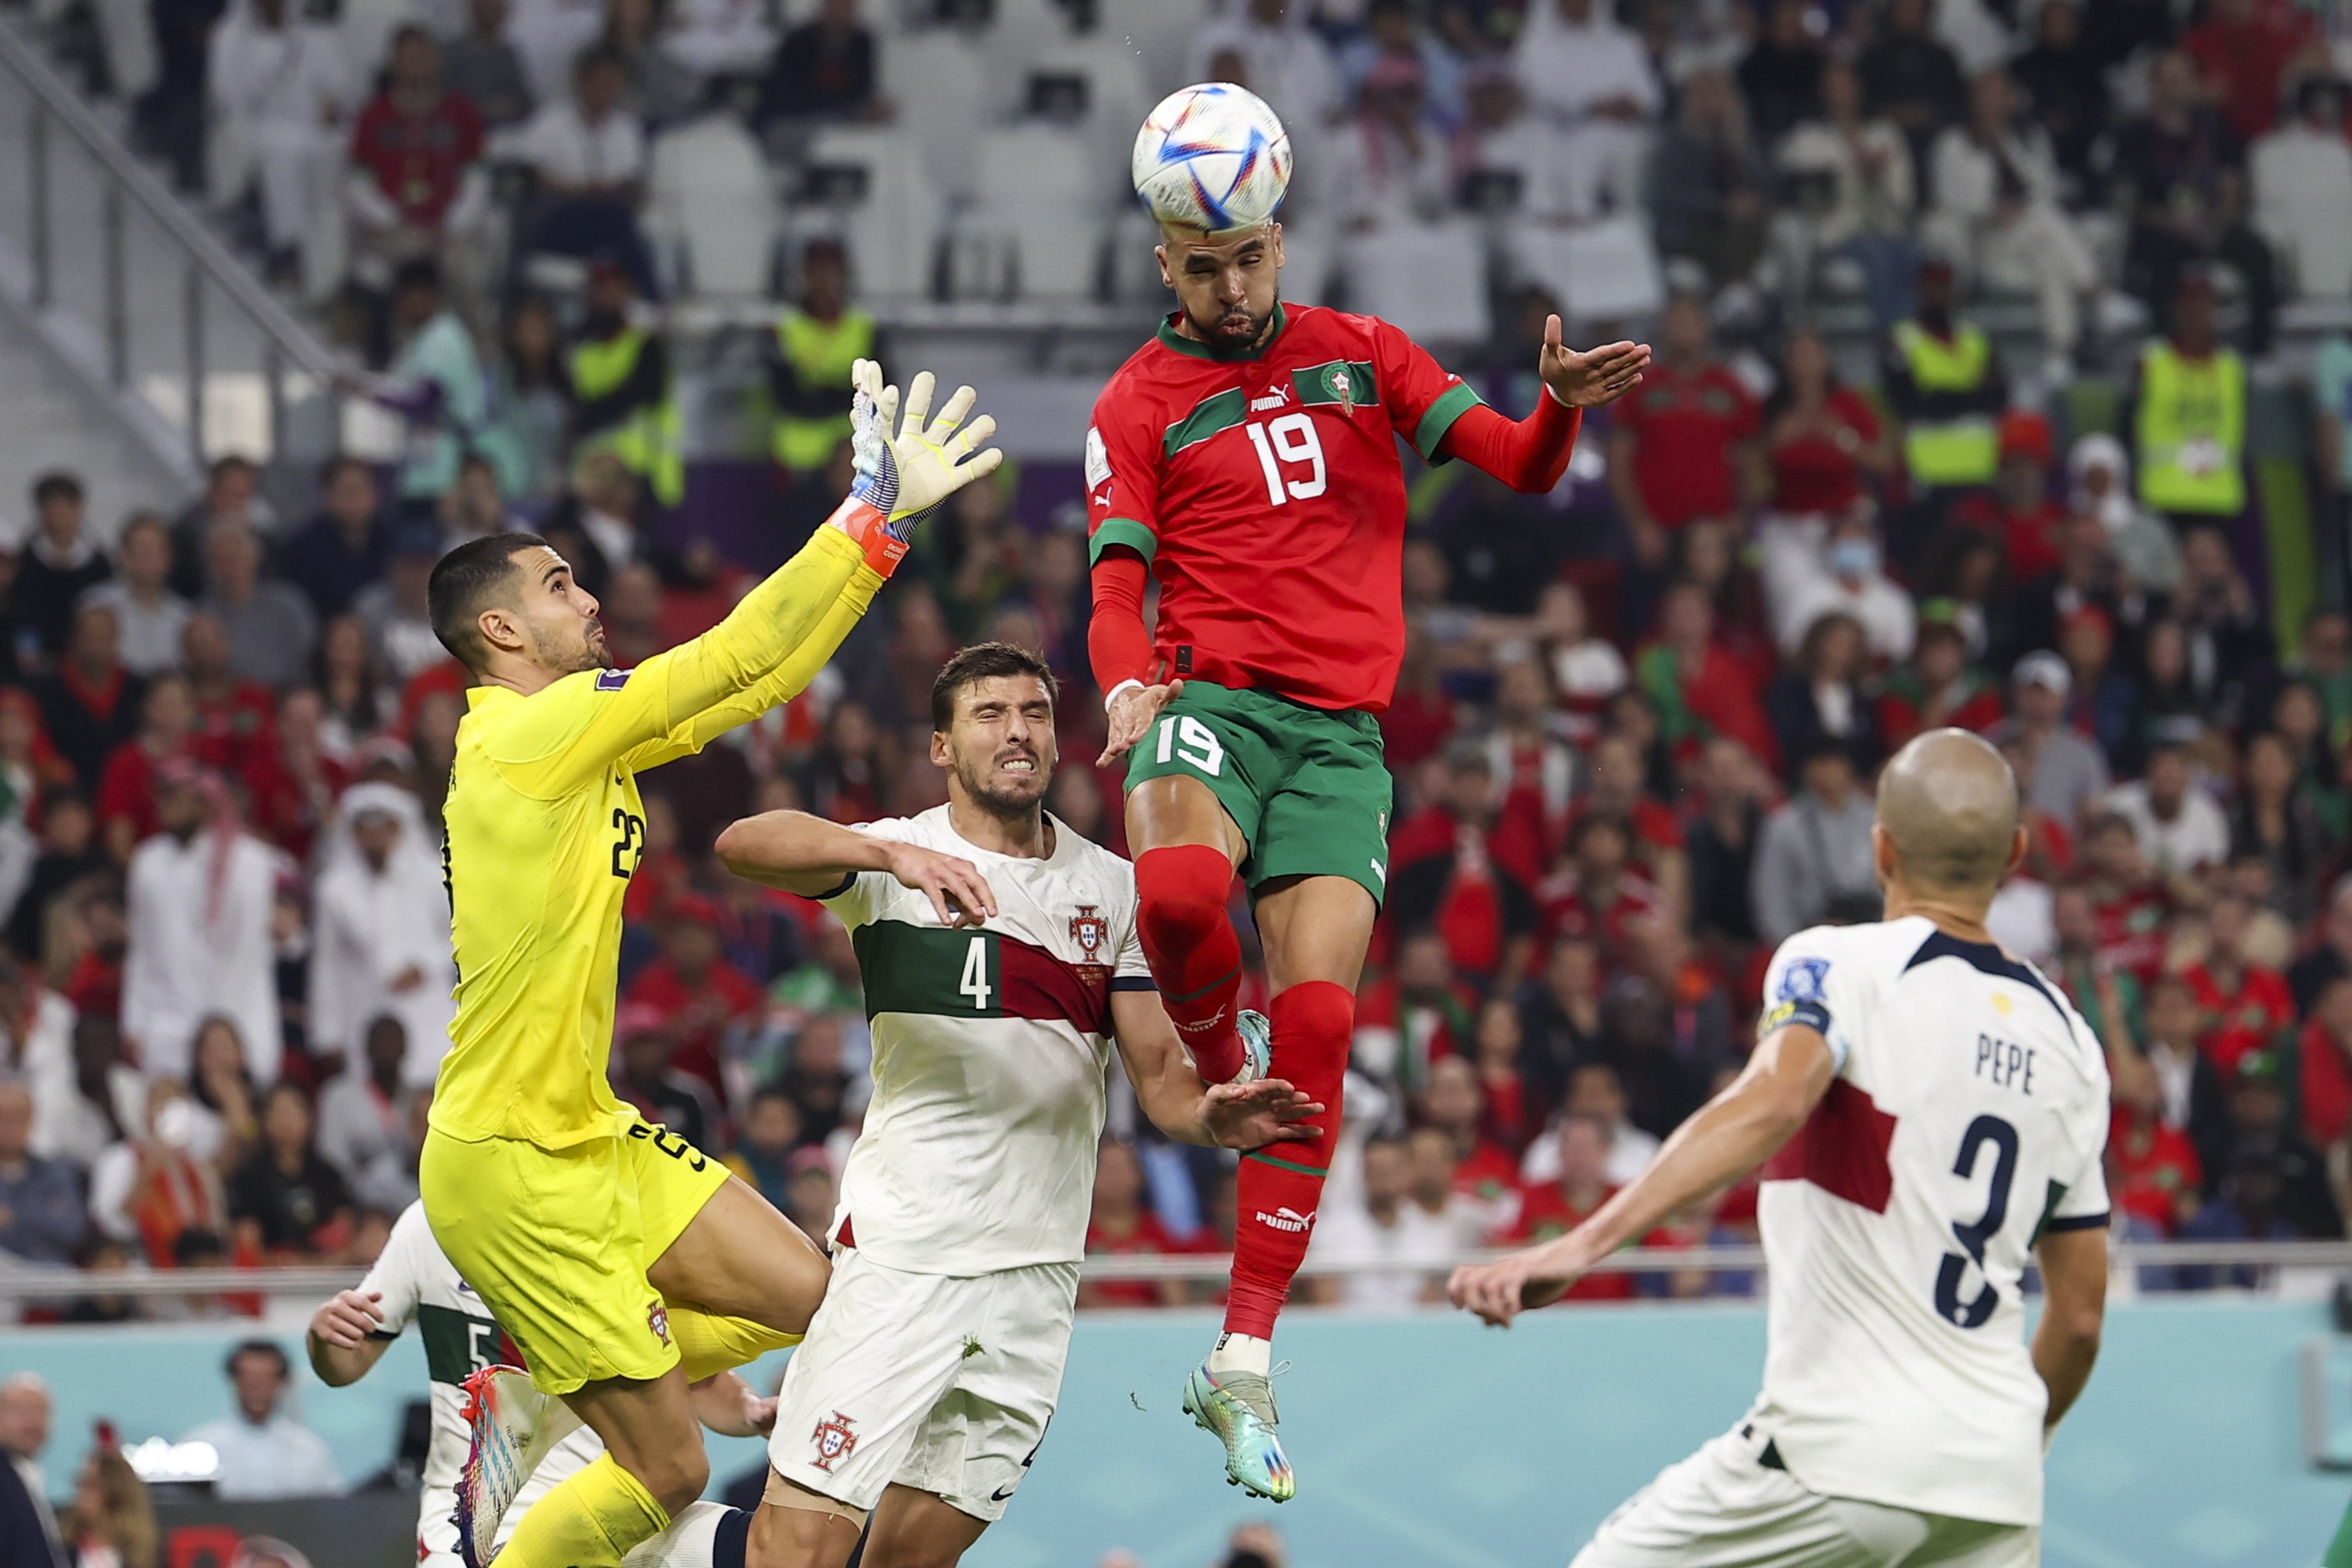 Youssef En-Nesyri leaps to score the opening goal during Morocco’s Fifa World Cup 2022 quarter final match against Portugal in Doha, Qatar on Saturday. Photo: EPA-EFE